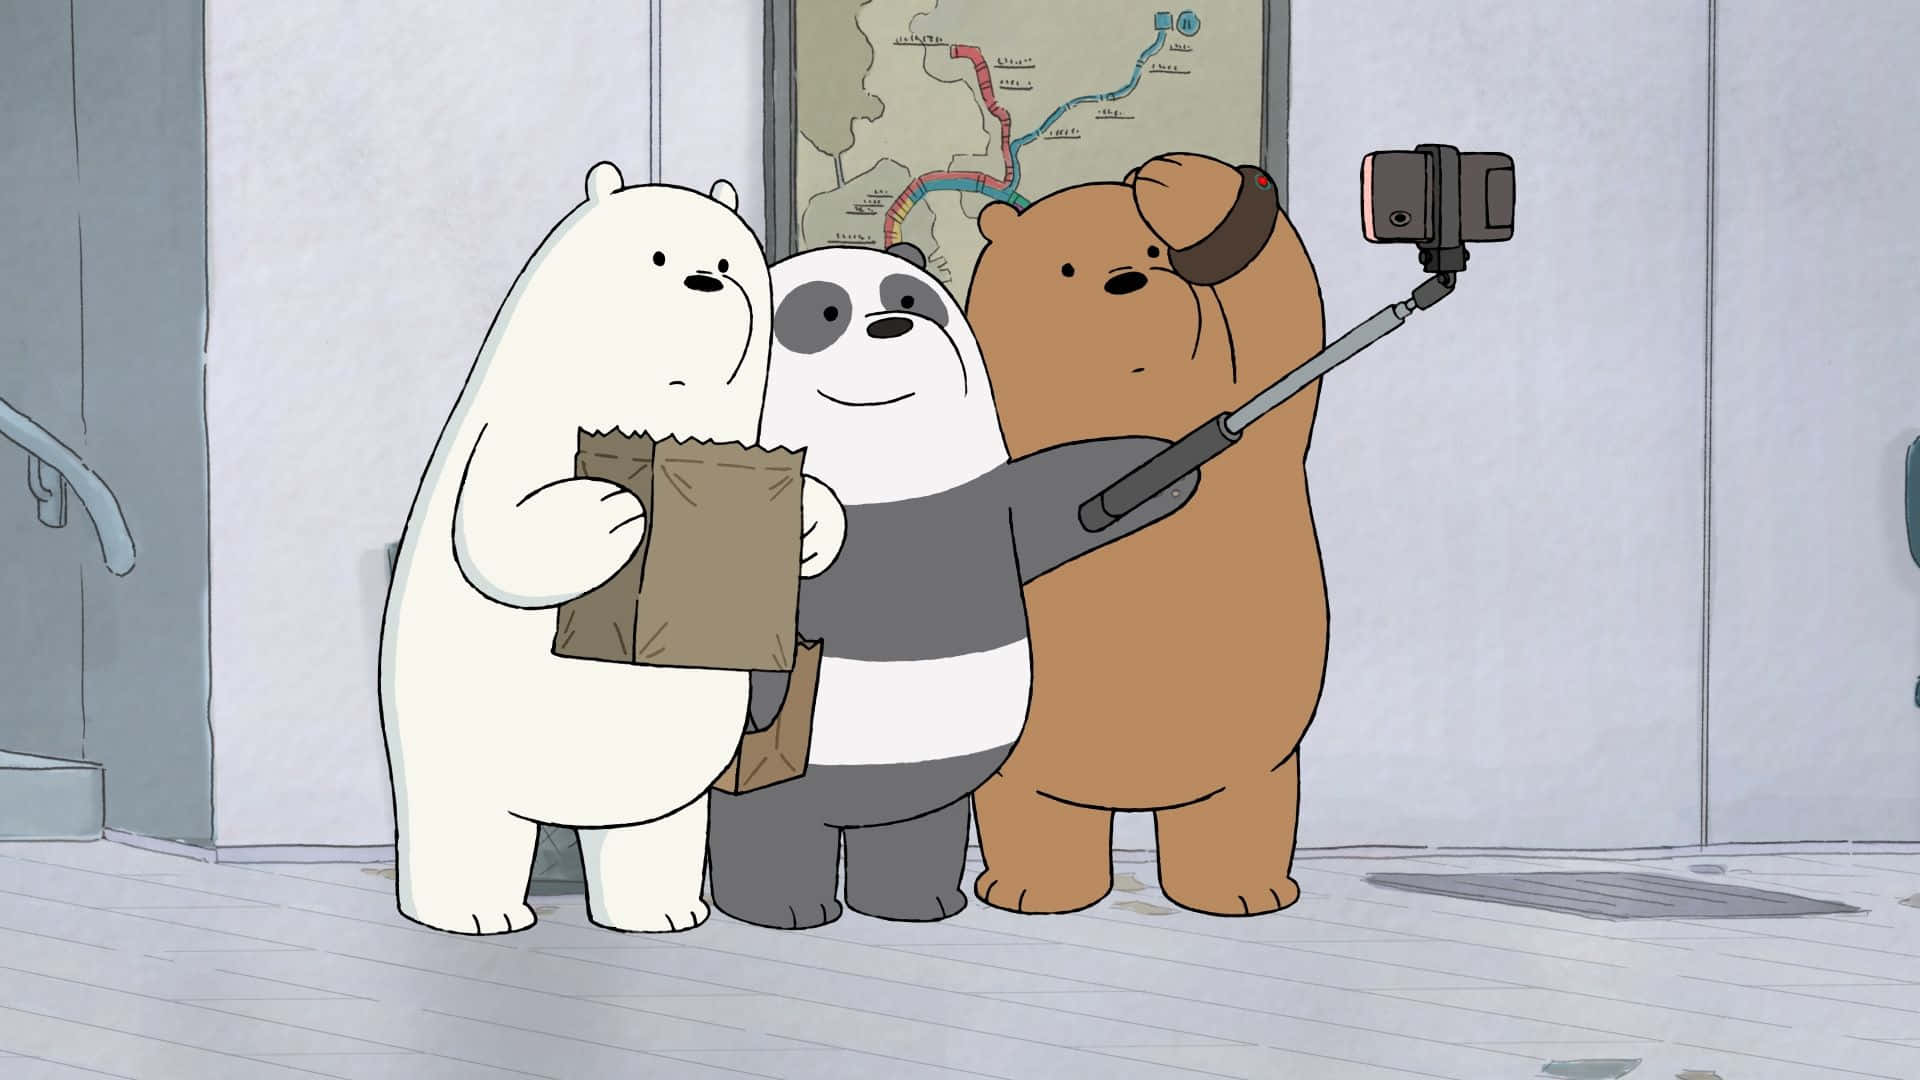 Join Grizz, Panda and Ice Bear on their adventures!